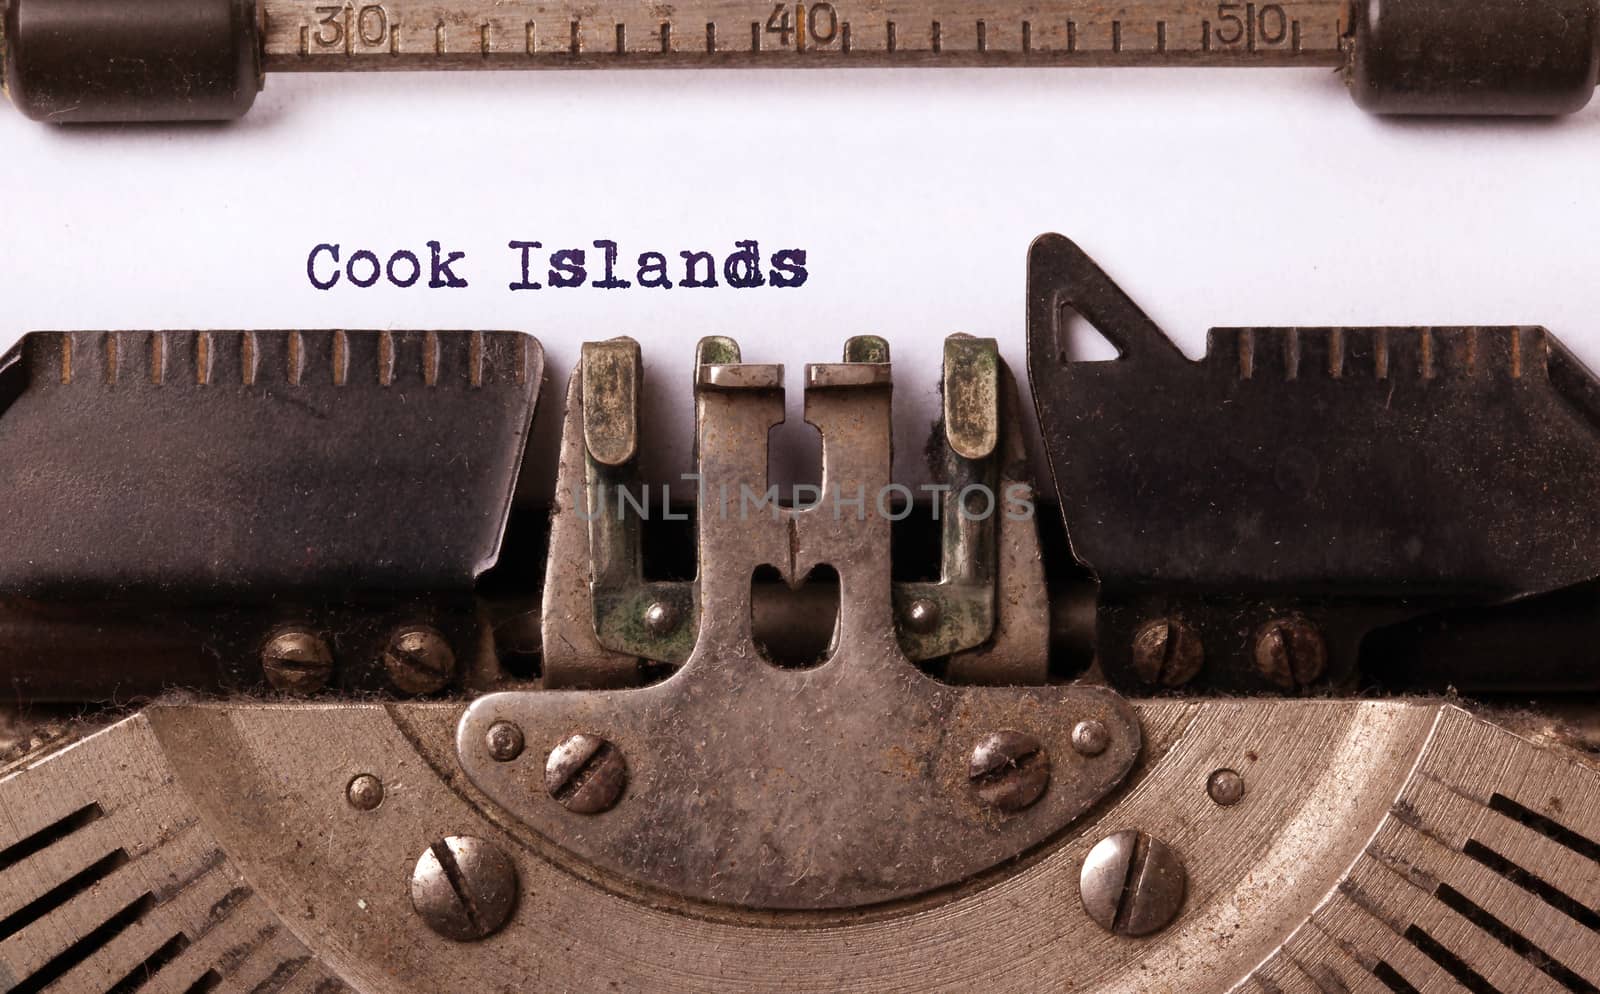 Inscription made by vinrage typewriter, country, Cook Islands